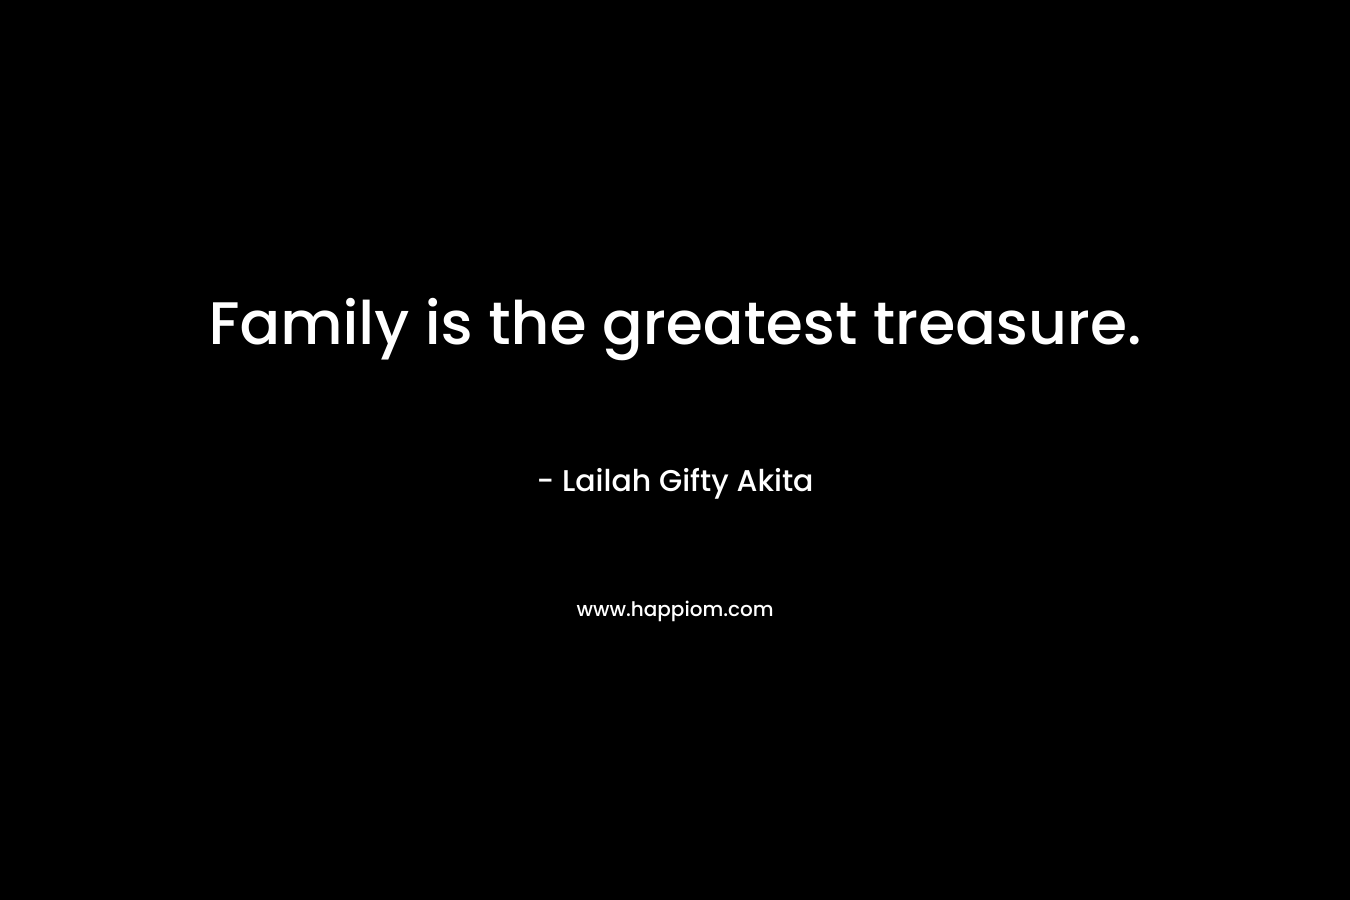 Family is the greatest treasure.